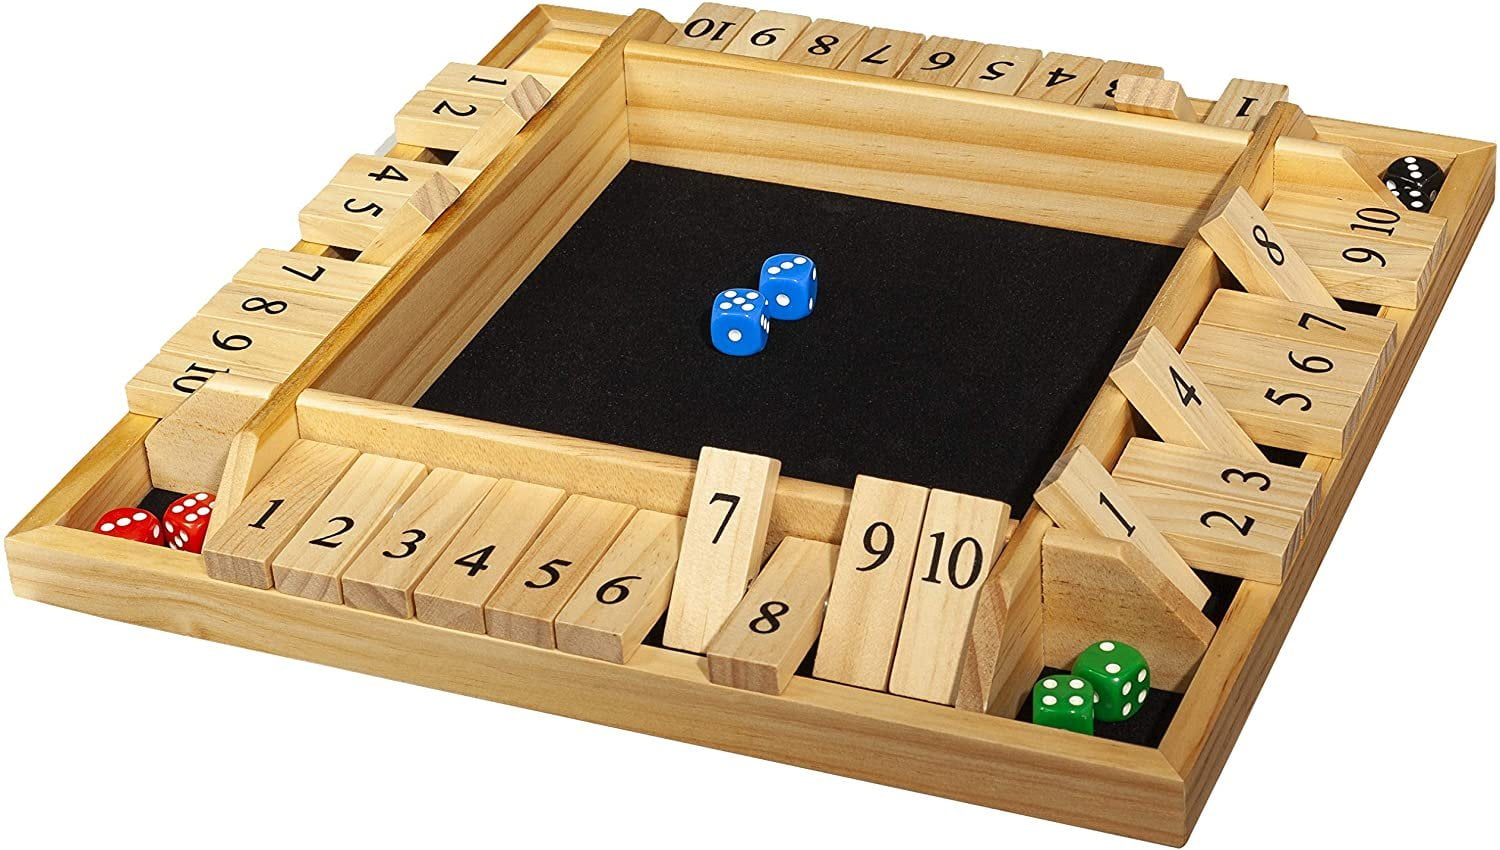 WE Games 4 Player Shut The Box(TM) Dice Game,Walnut Stained Wood, Large  Size, 1 unit - Mariano's